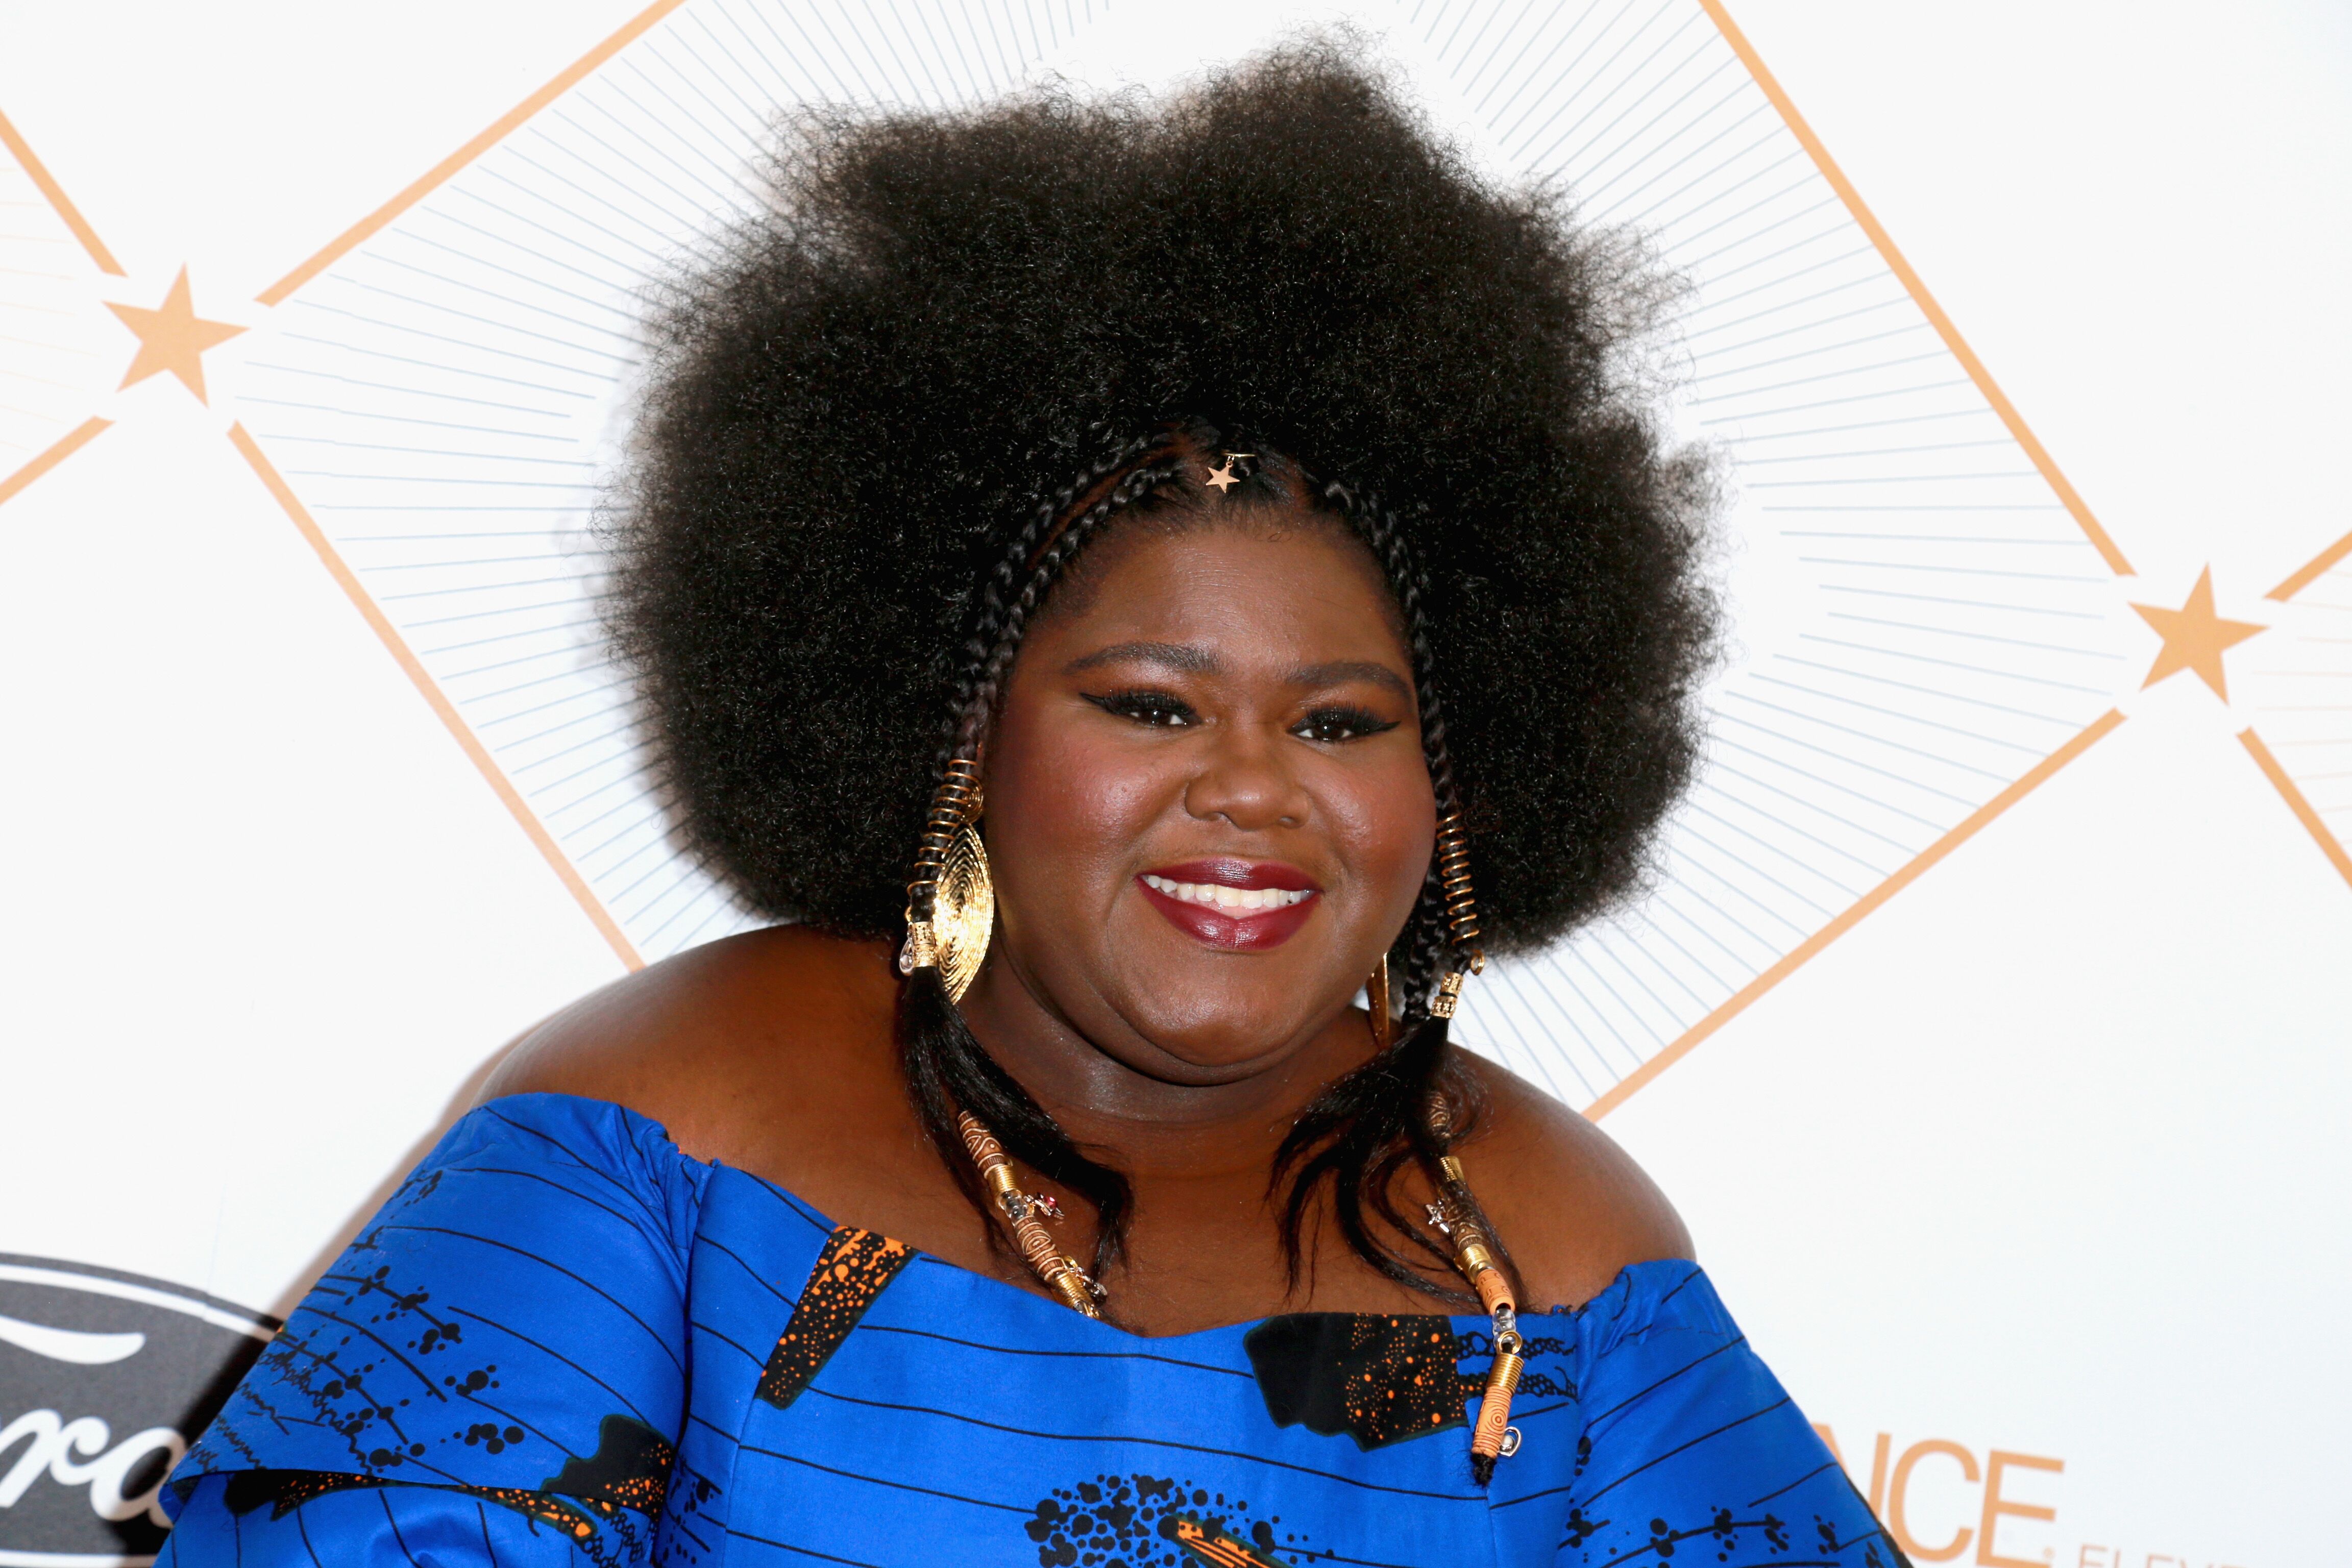 Gabourey Sidibe at the 2018 Essence Black Women In Hollywood Oscars Luncheon | Source: Getty Images